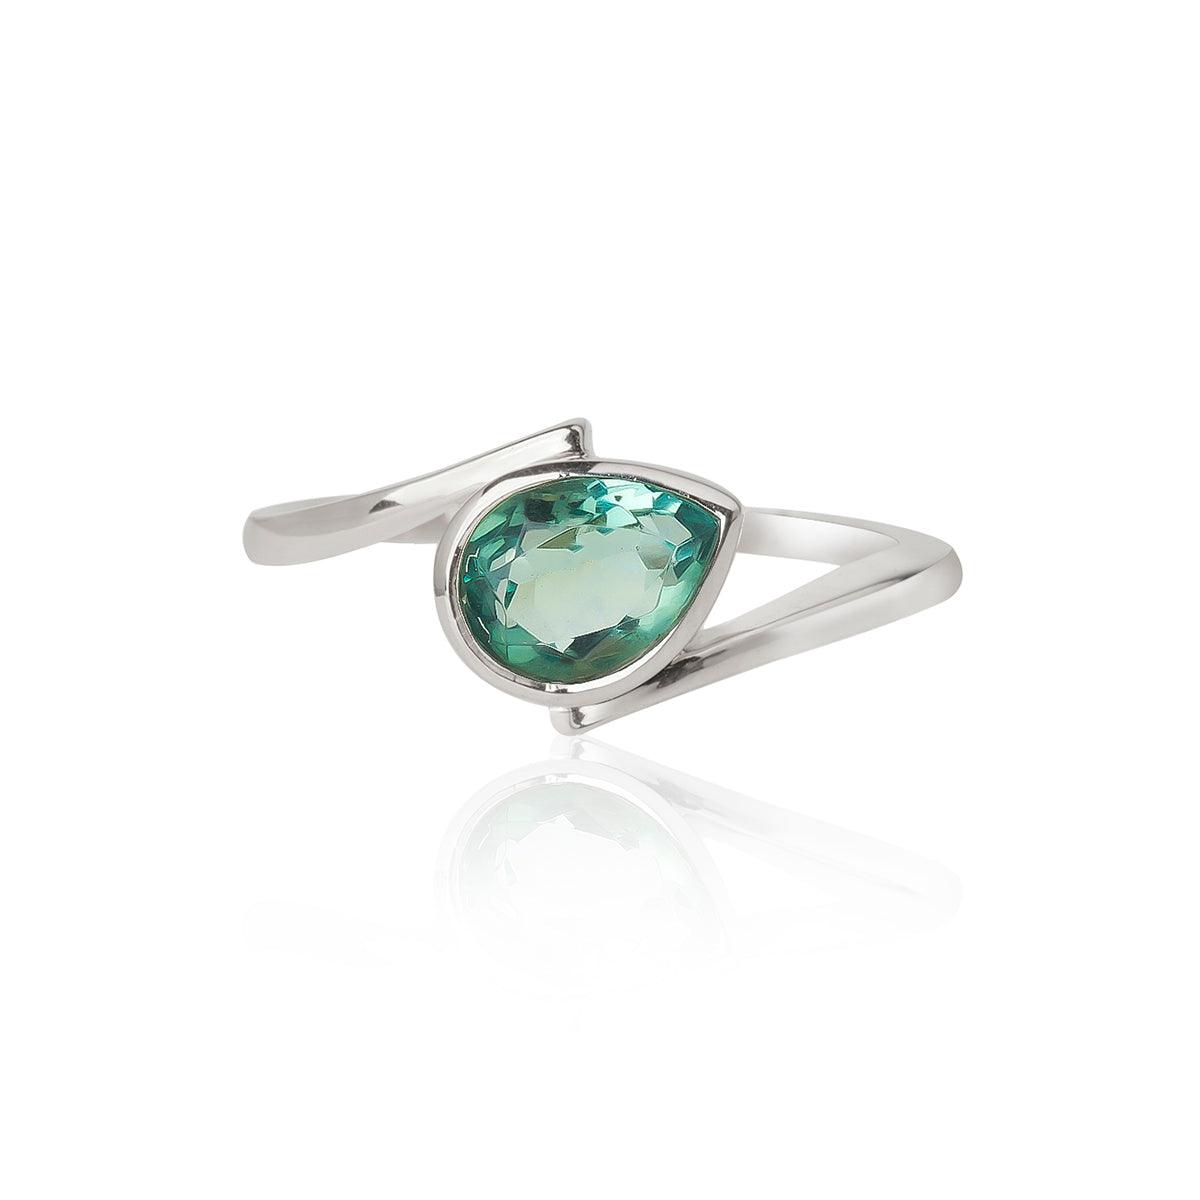 1.20 Ct. Green Fluorite 925 Sterling Silver Solitaire Ring Jewelry - YoTreasure